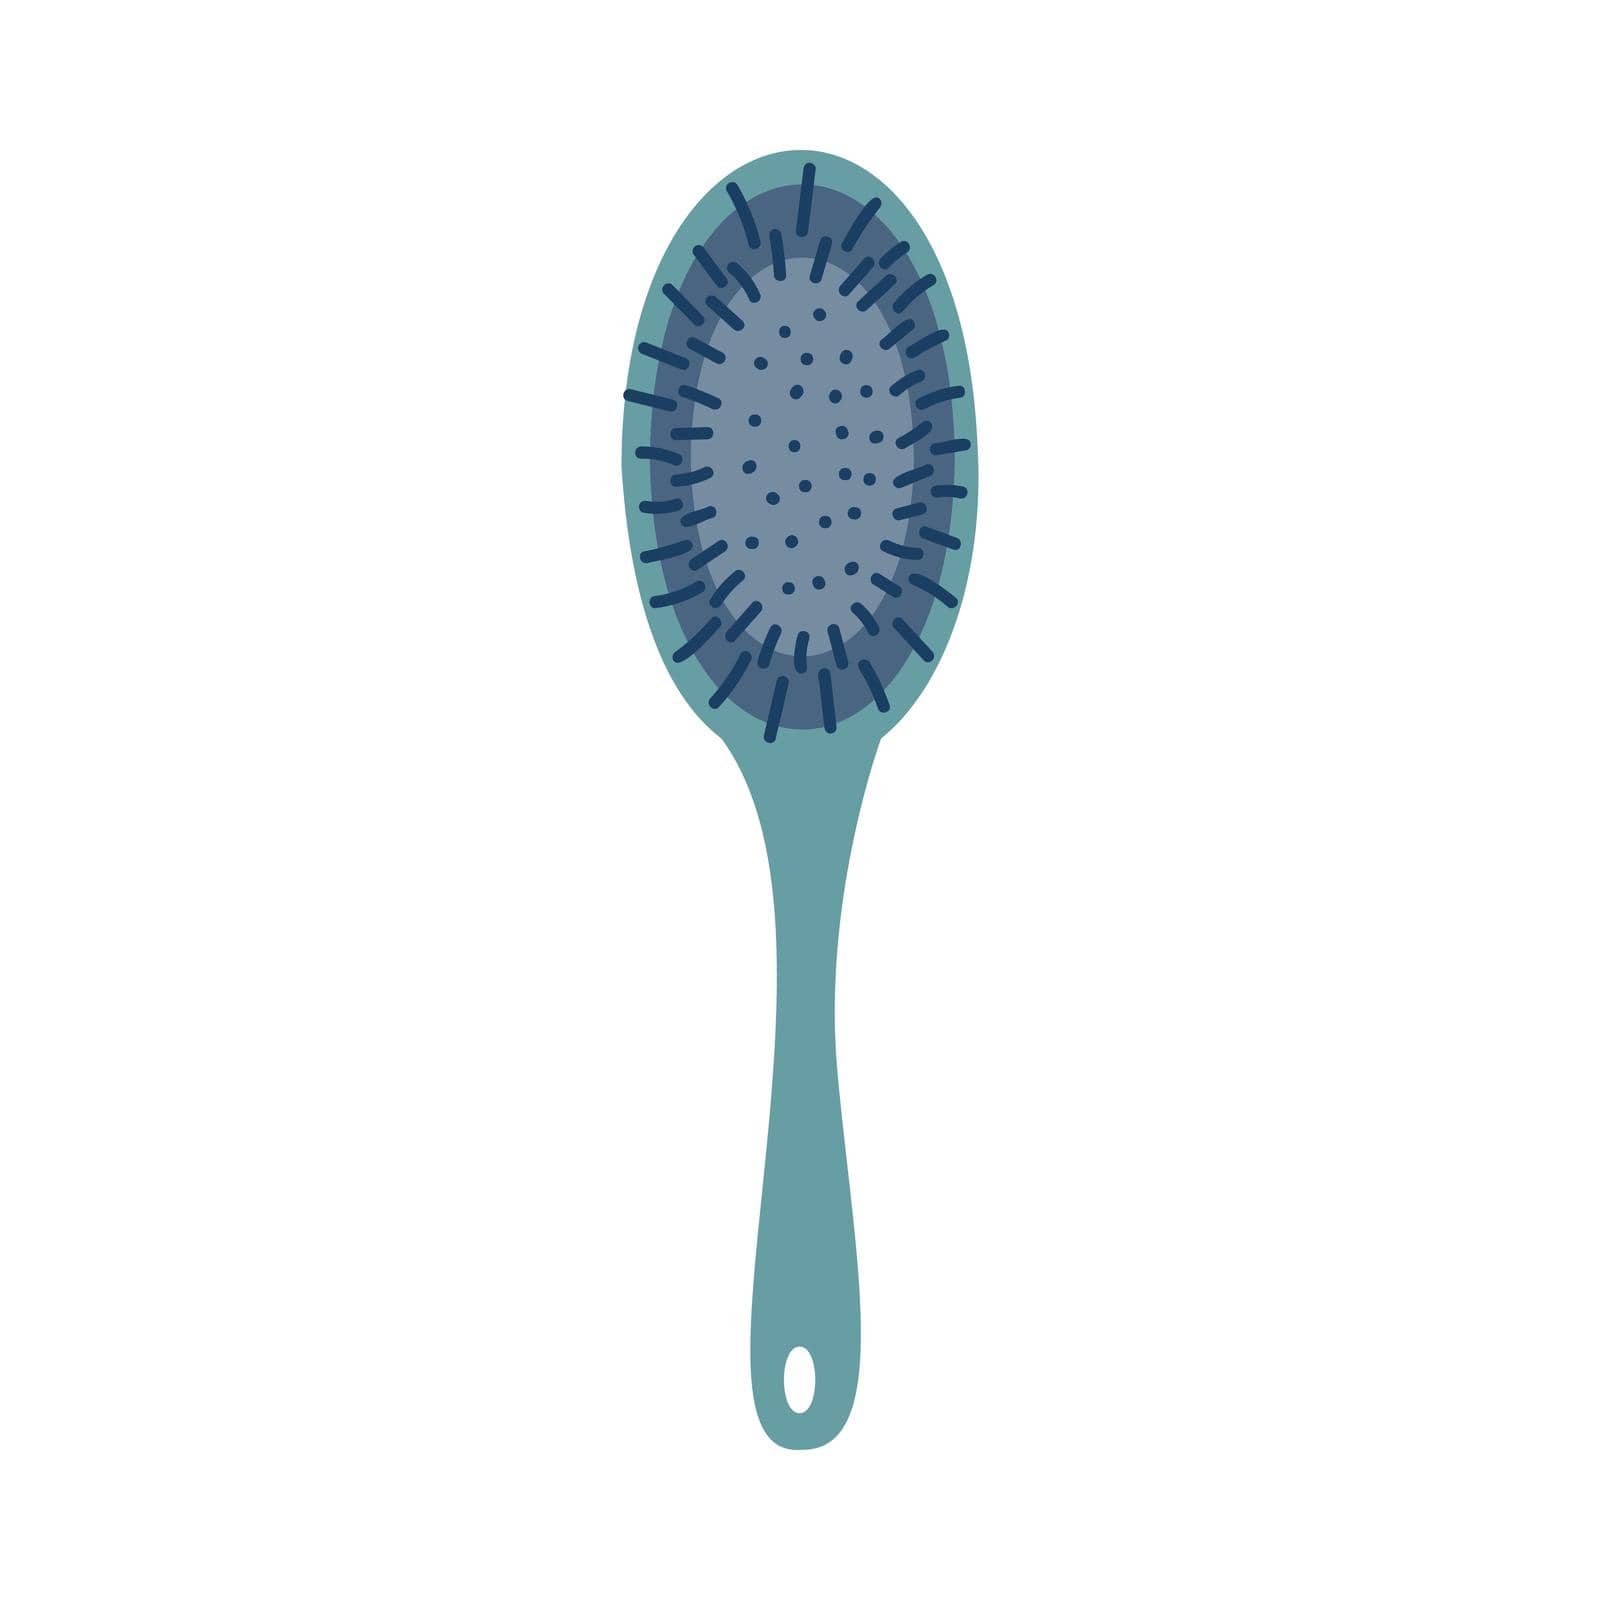 Massage comb for hair. Vector flat image on a white background.